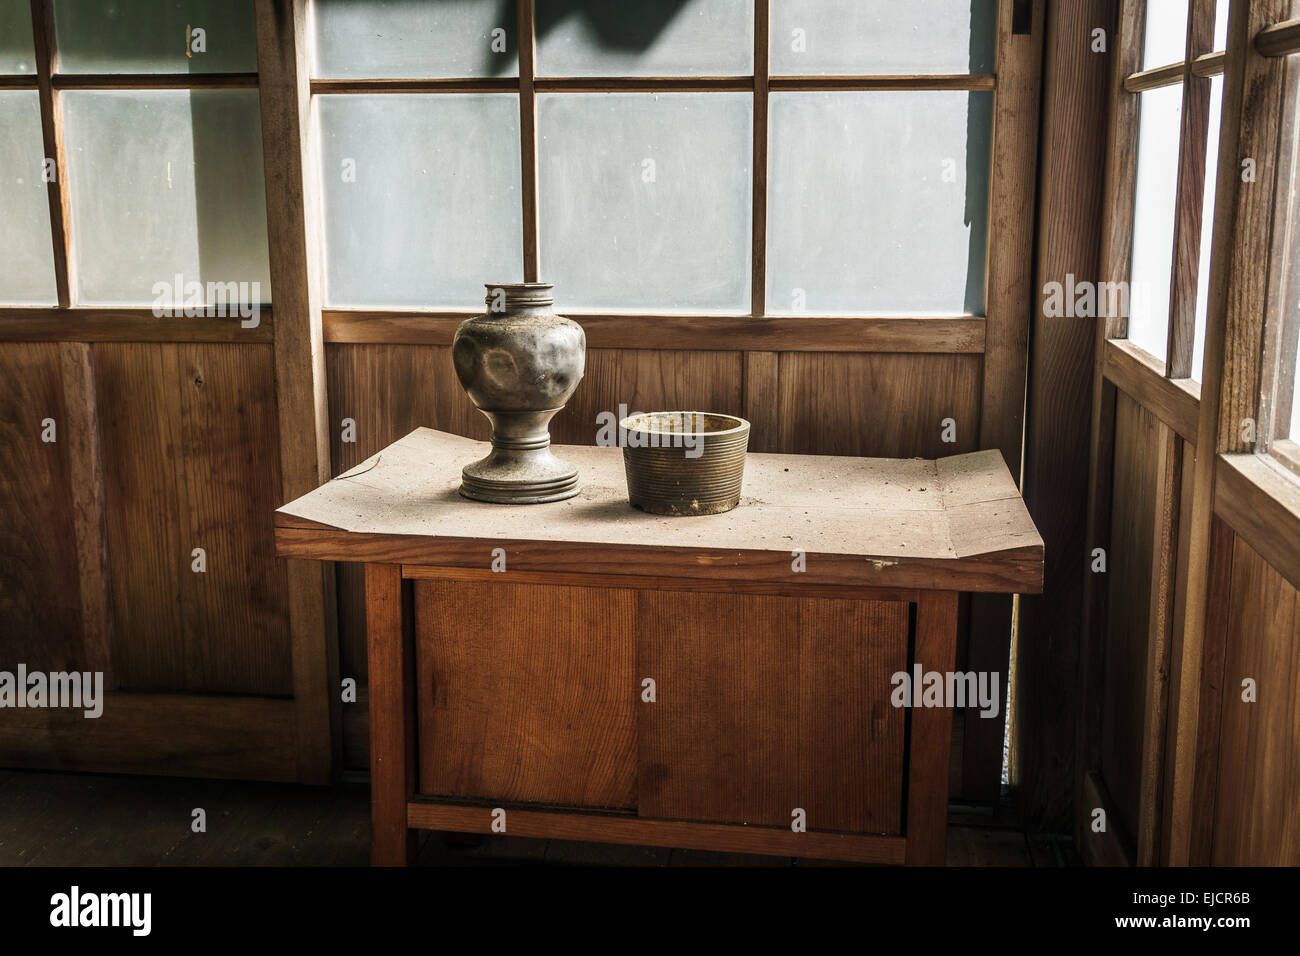 Two old vases on a wooden table in an abandoned wooden building on a sunny day Stock Photo